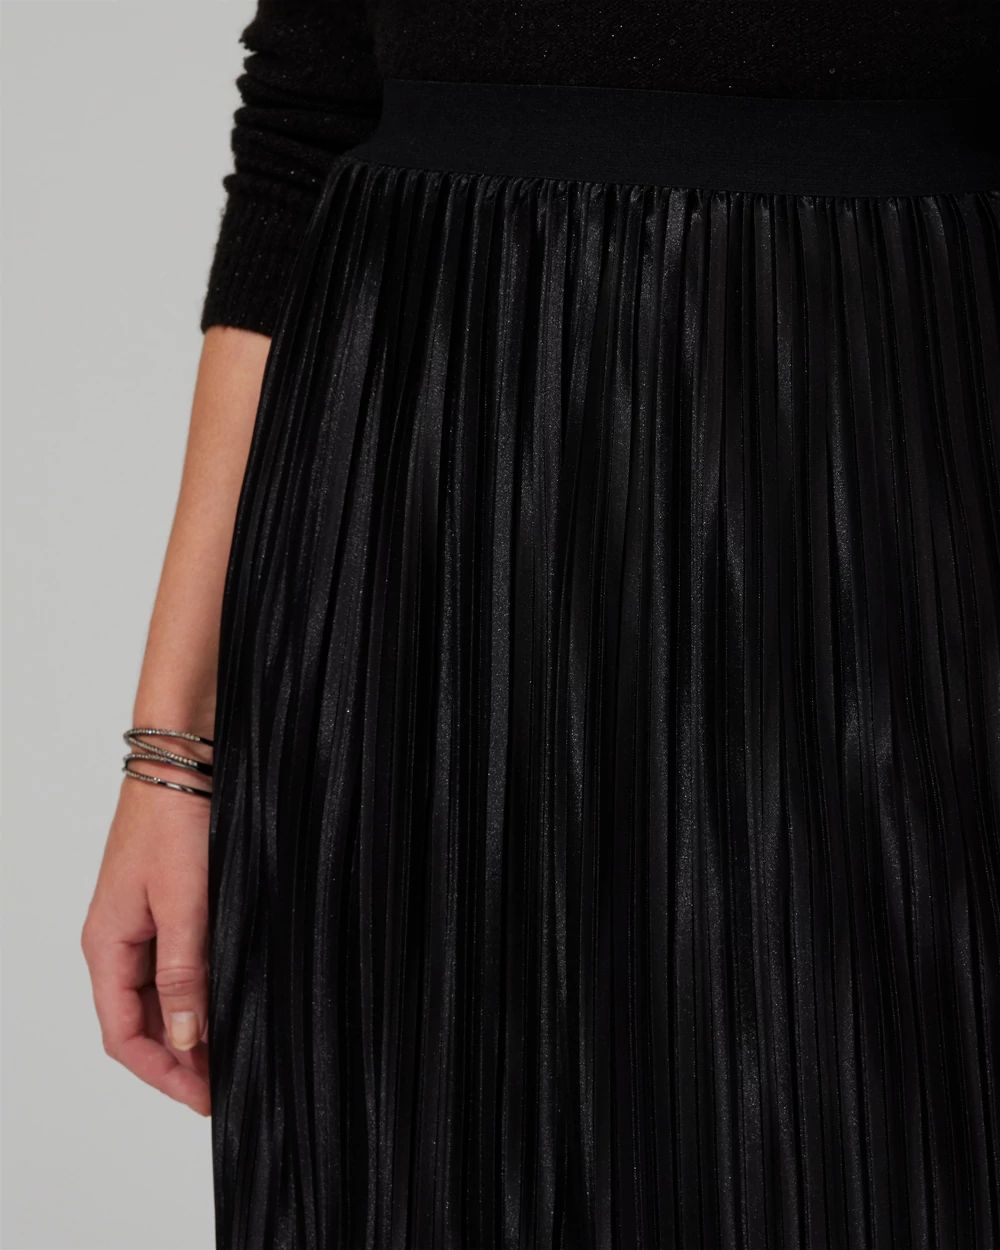 Outlet WHBM Pleated Drama Midi Skirt click to view larger image.